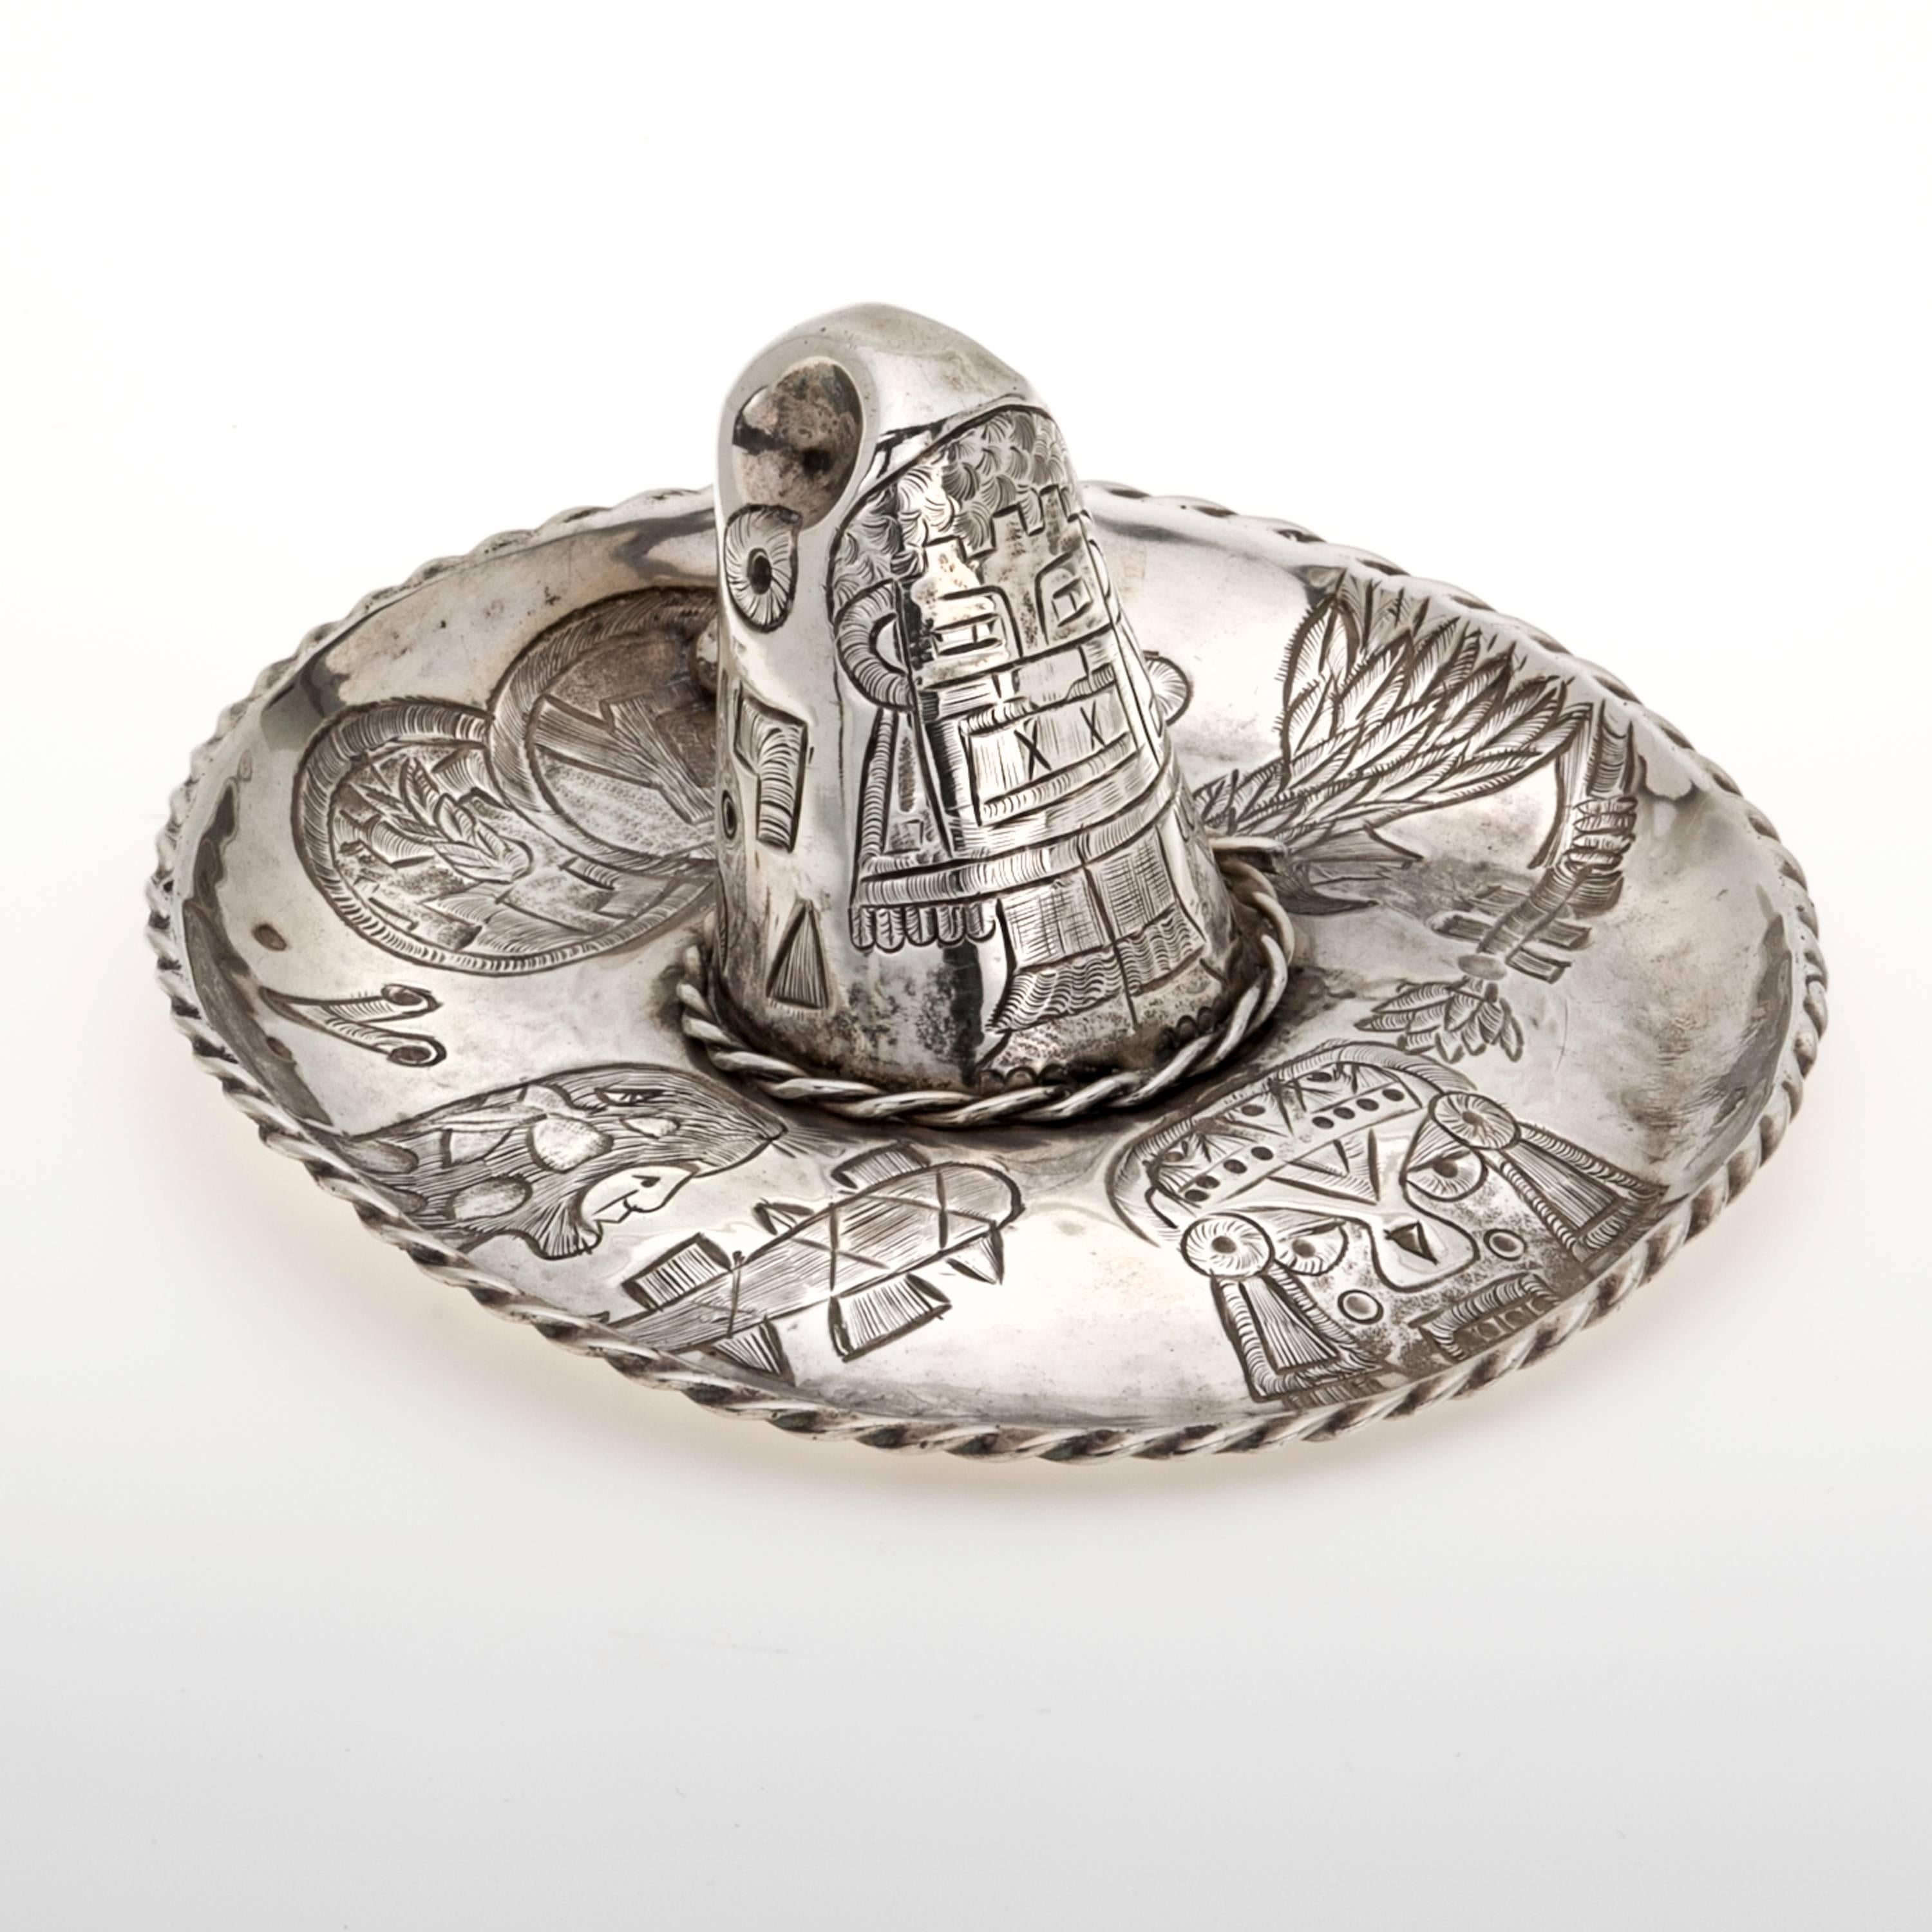 Charming sterling silver Sombrero. Nicely detailed etch Mexico design, silver twisted rope trim.